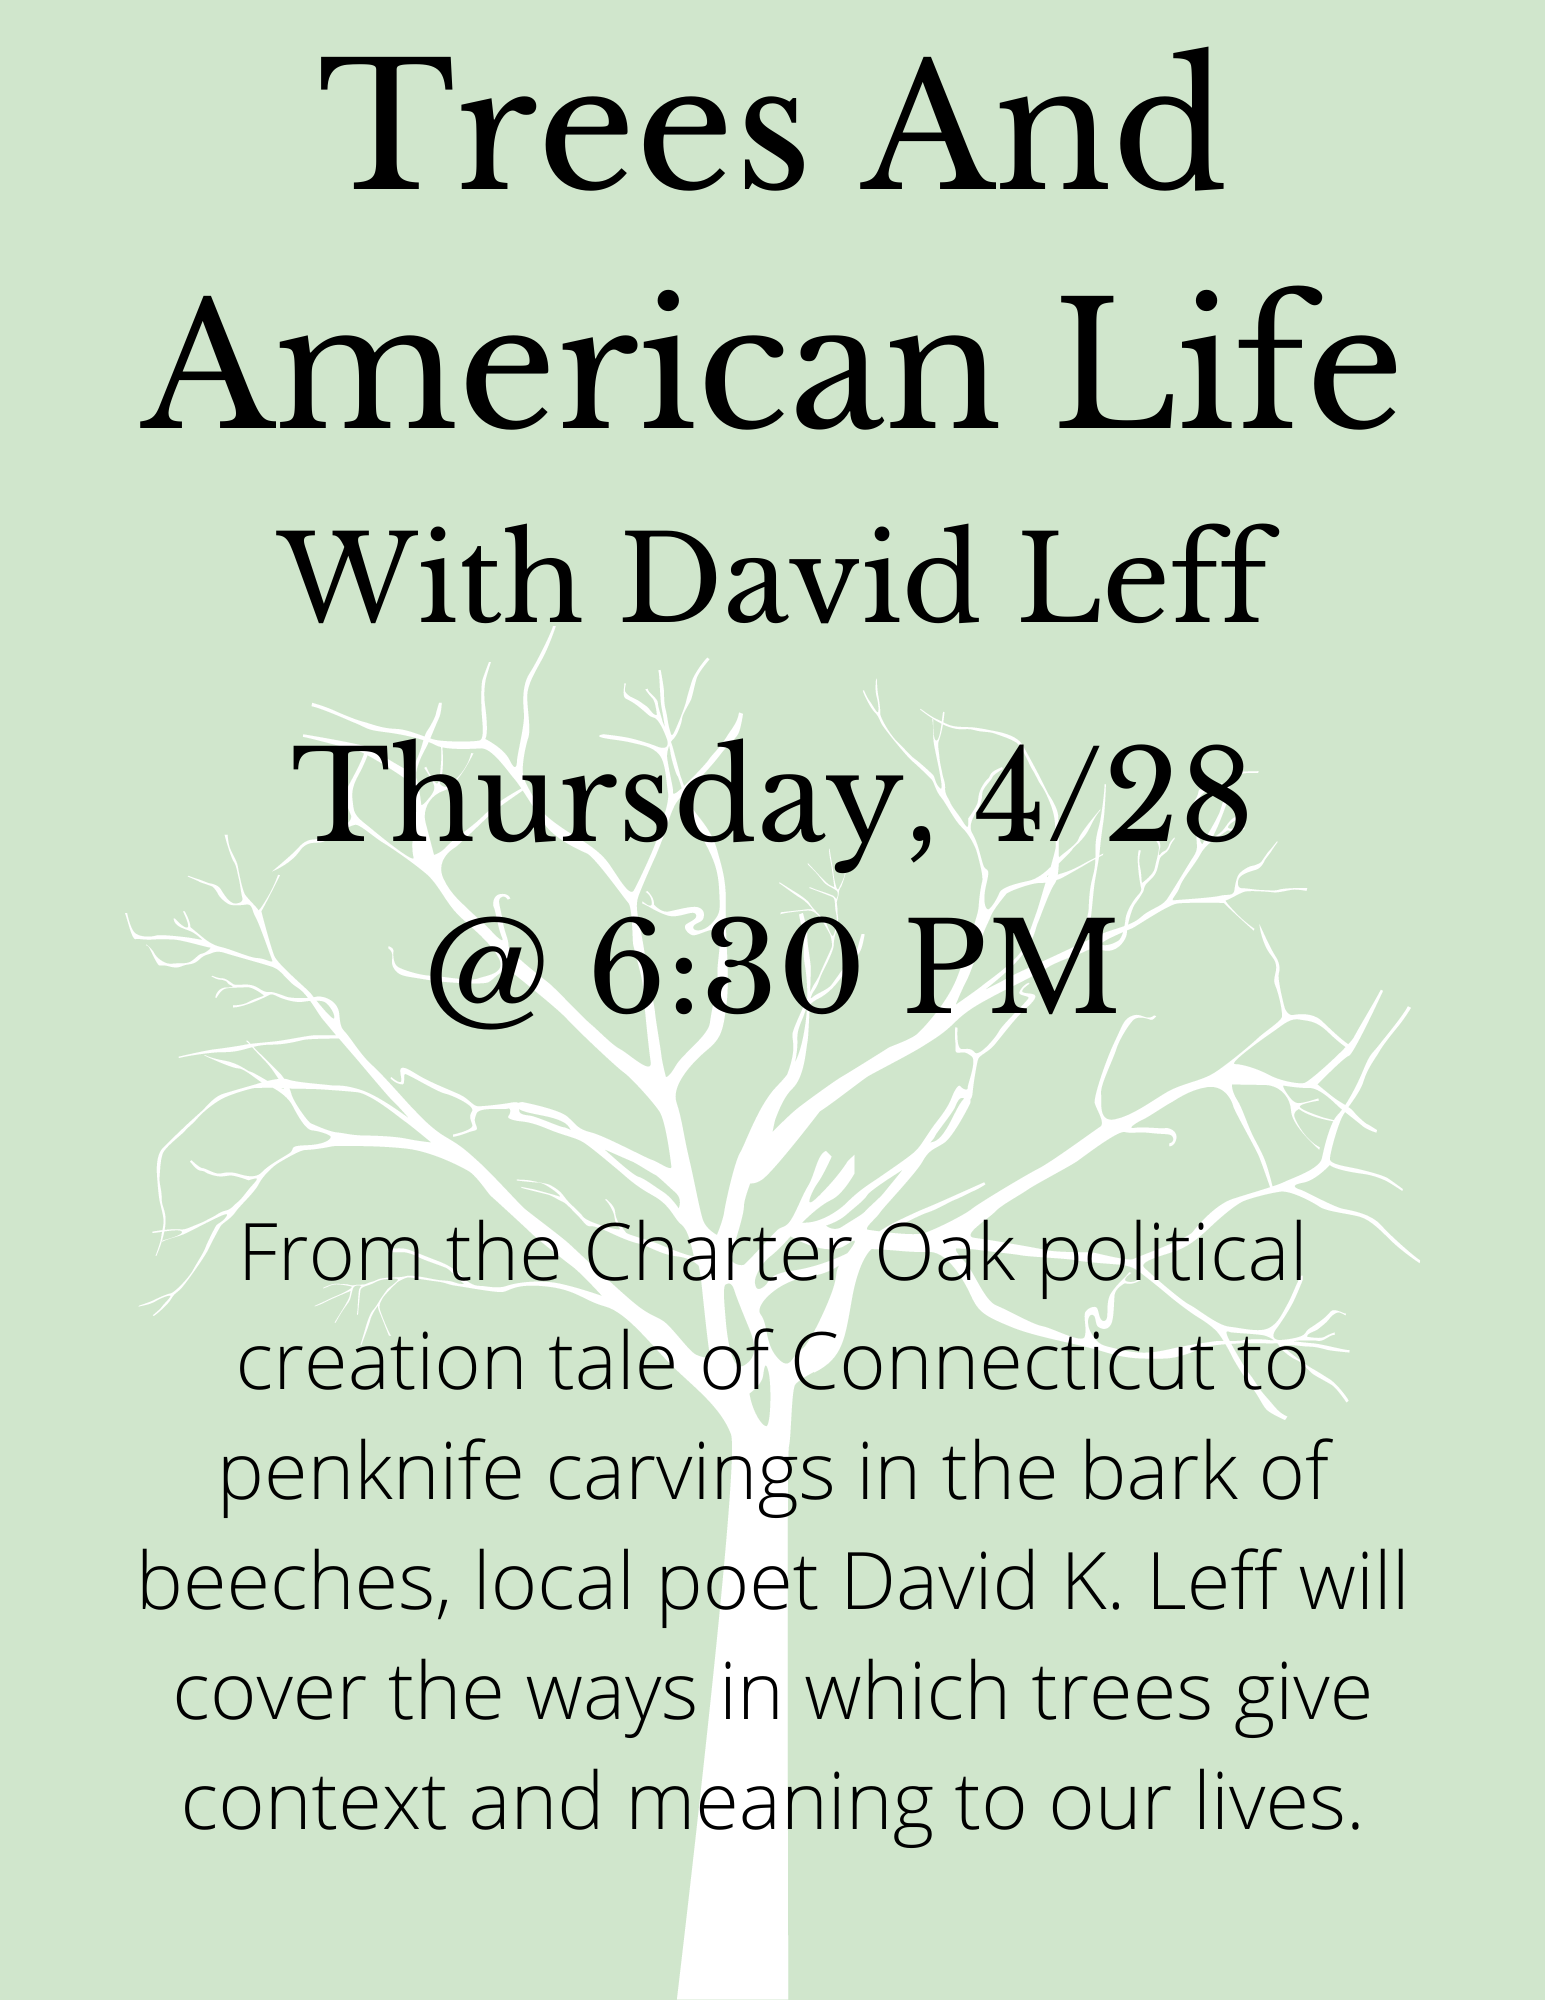 Trees and American Life with David Leff